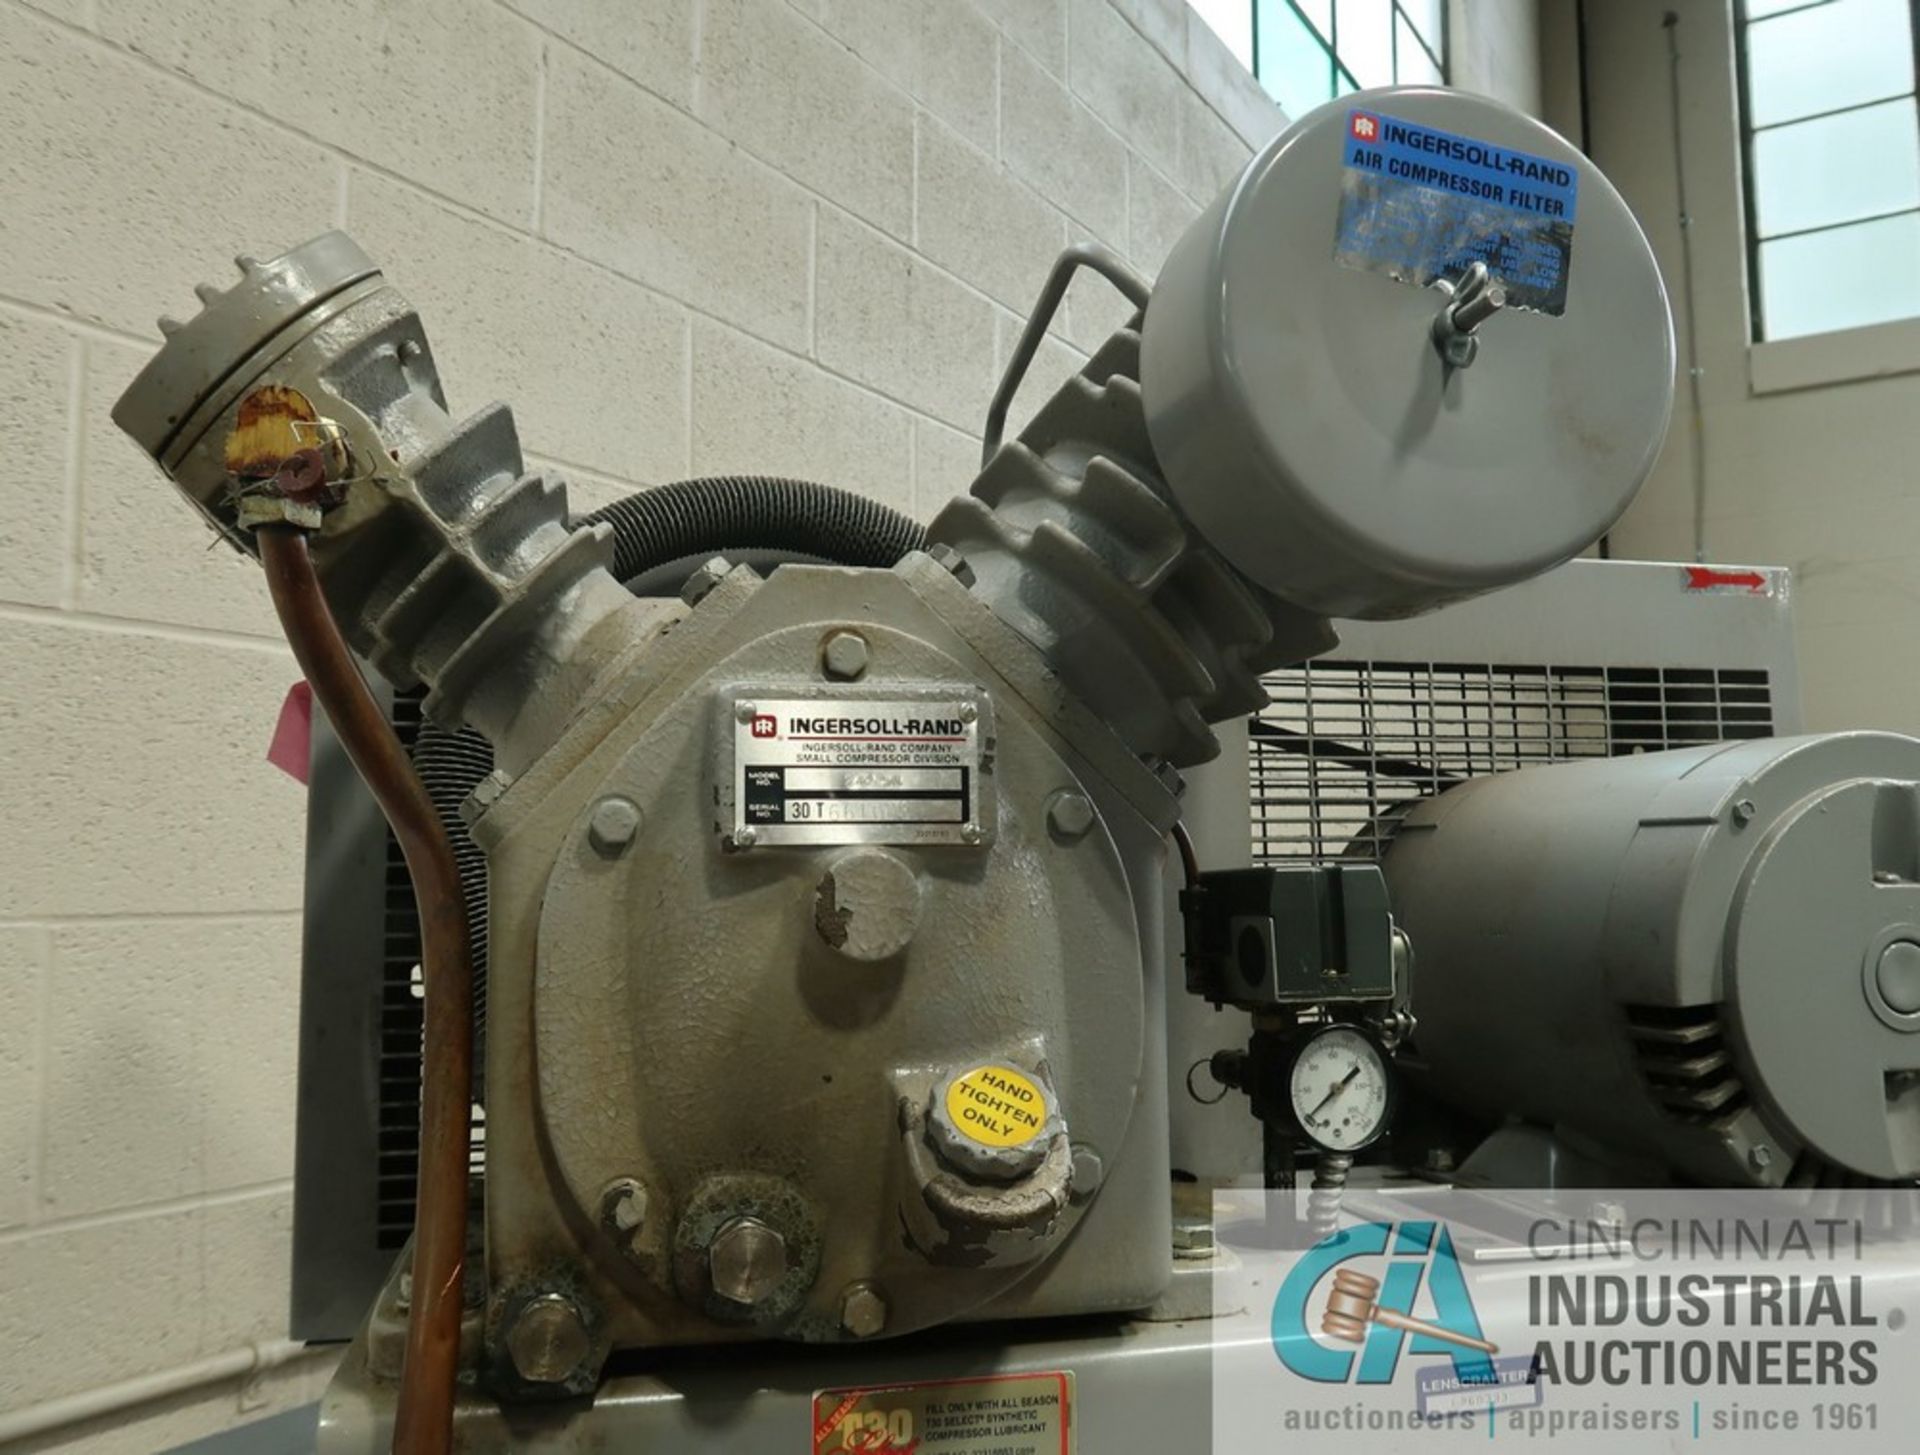 INGERSOLL RAND MODEL T30 VERTICAL TANK AIR COMPRESSOR; S/N 30T661006, 3-PHASE, 200 VOLTS, 5 HP MOTOR - Image 4 of 8